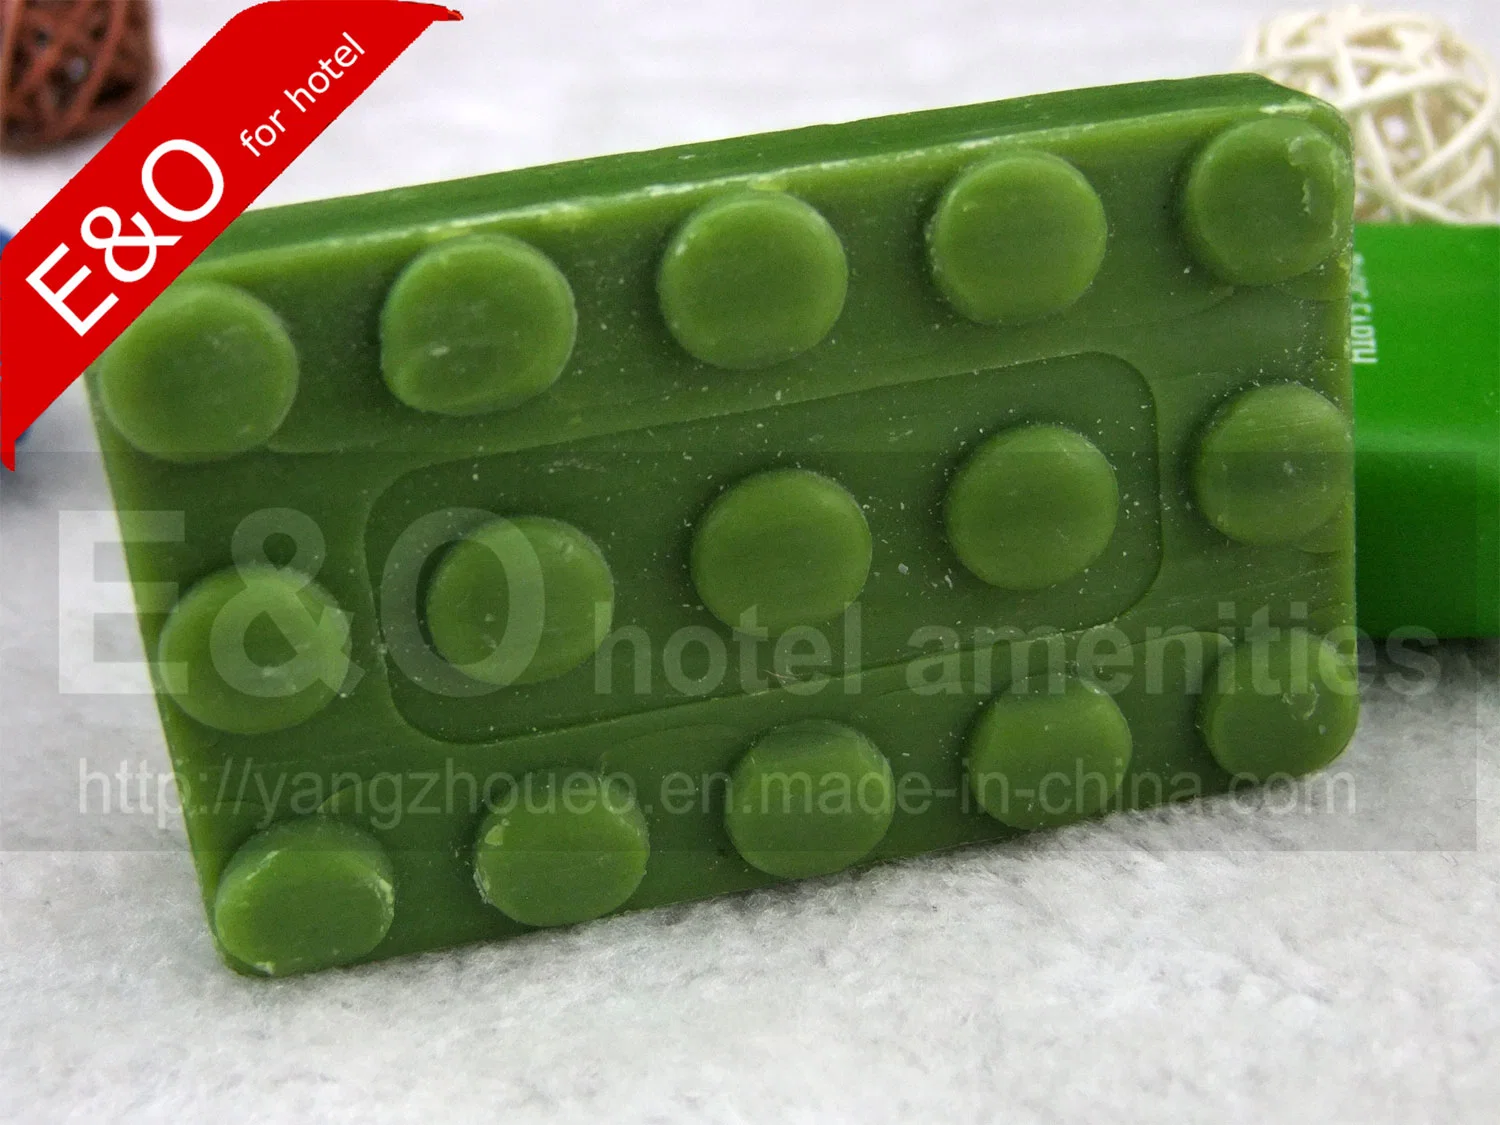 Natural Body Care Wash Soap for Medical Soap